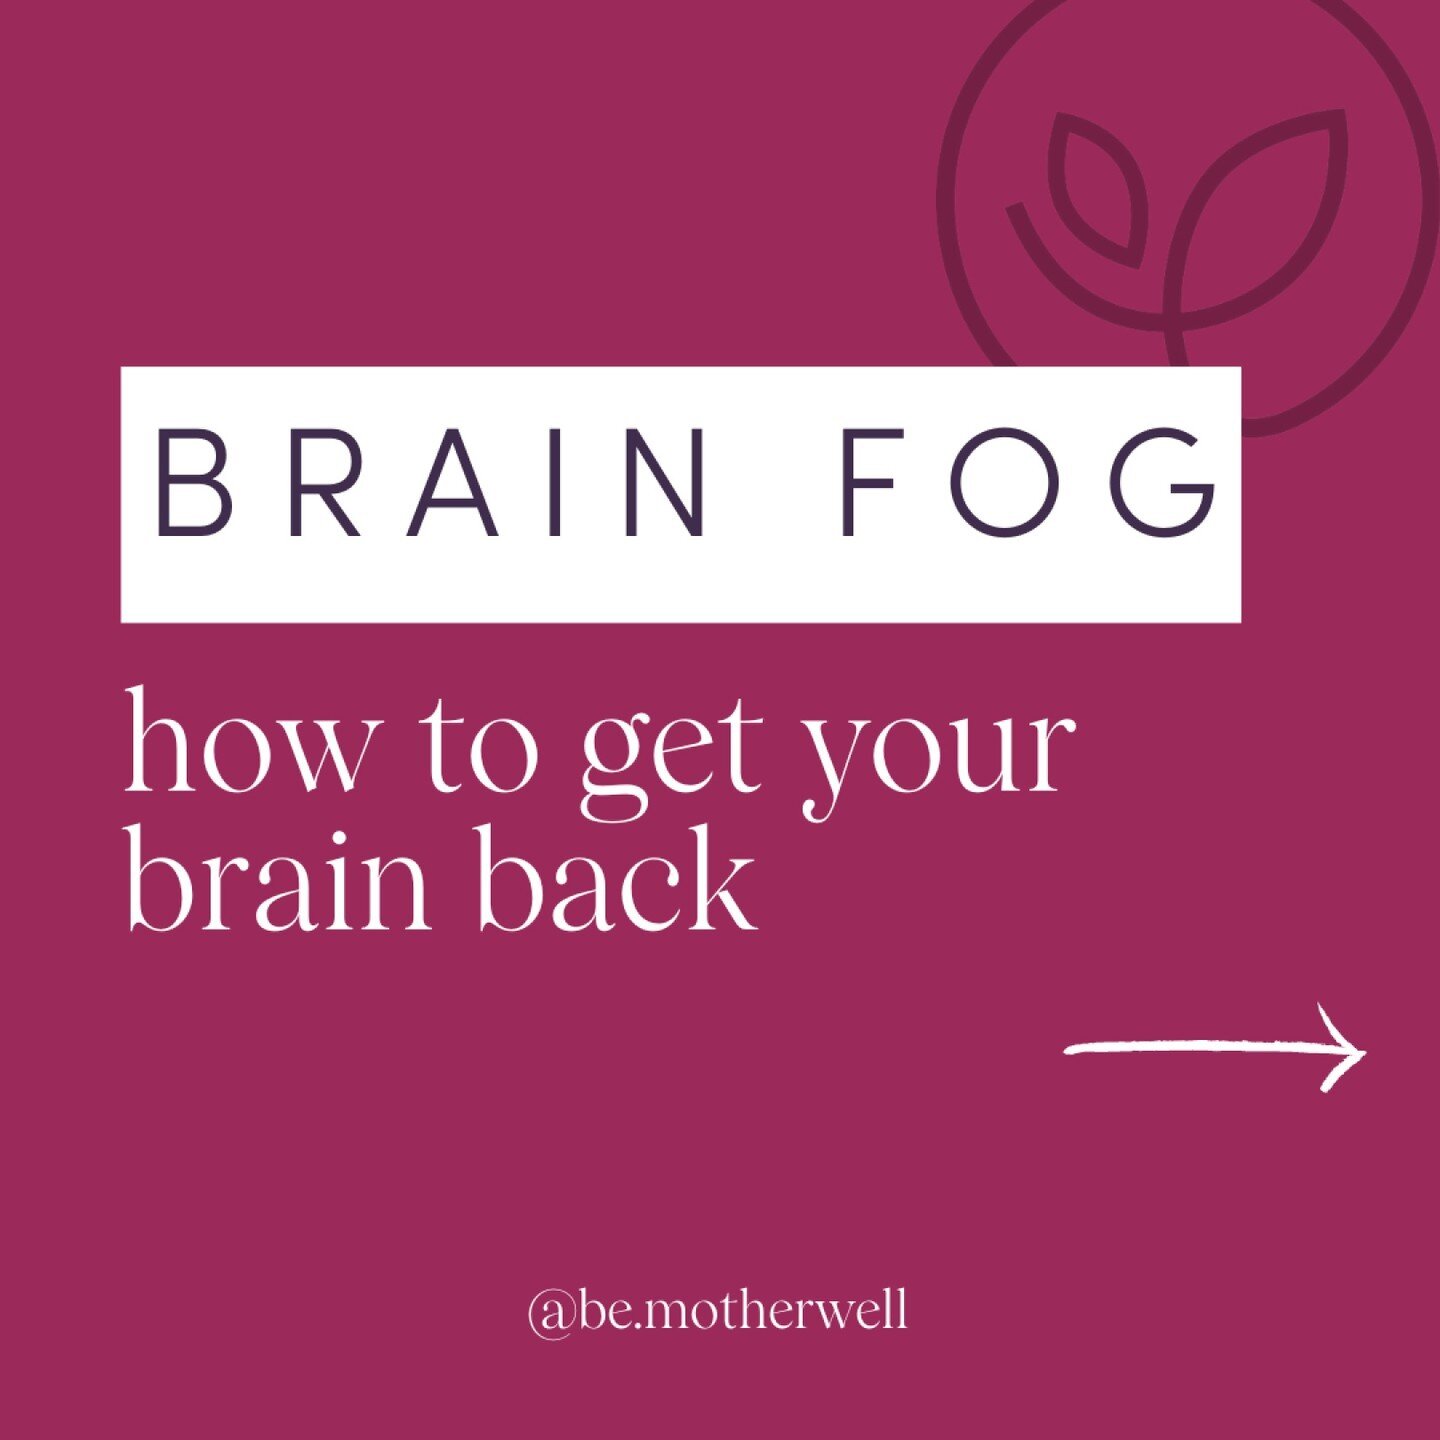 Brain fog, mommy brain, bad memory, &ldquo;when did I get so dumb?&rdquo; Whatever we want to call it, I'm seeing this more often in both my patients and myself during times of high stress! 

Swipe through for my 4 bite-size changes that you can prac